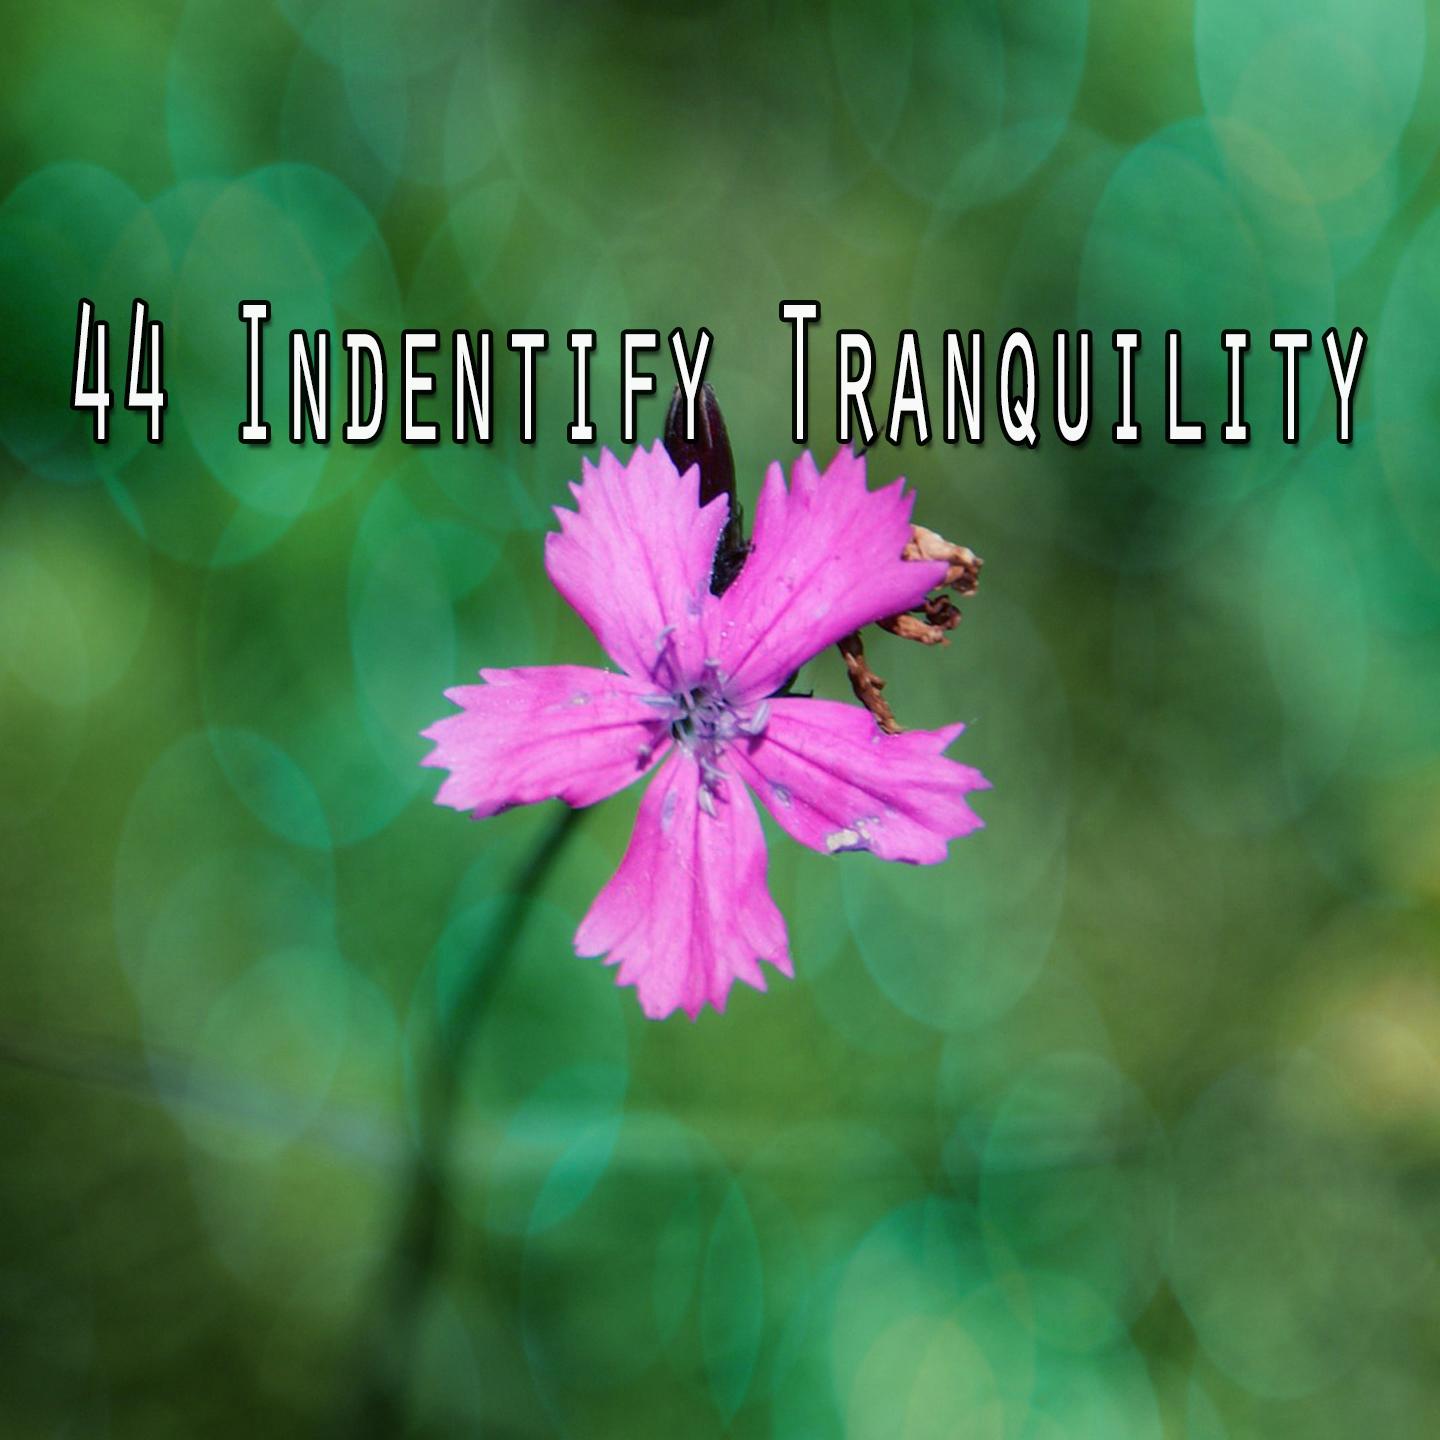 44 Indentify Tranquility